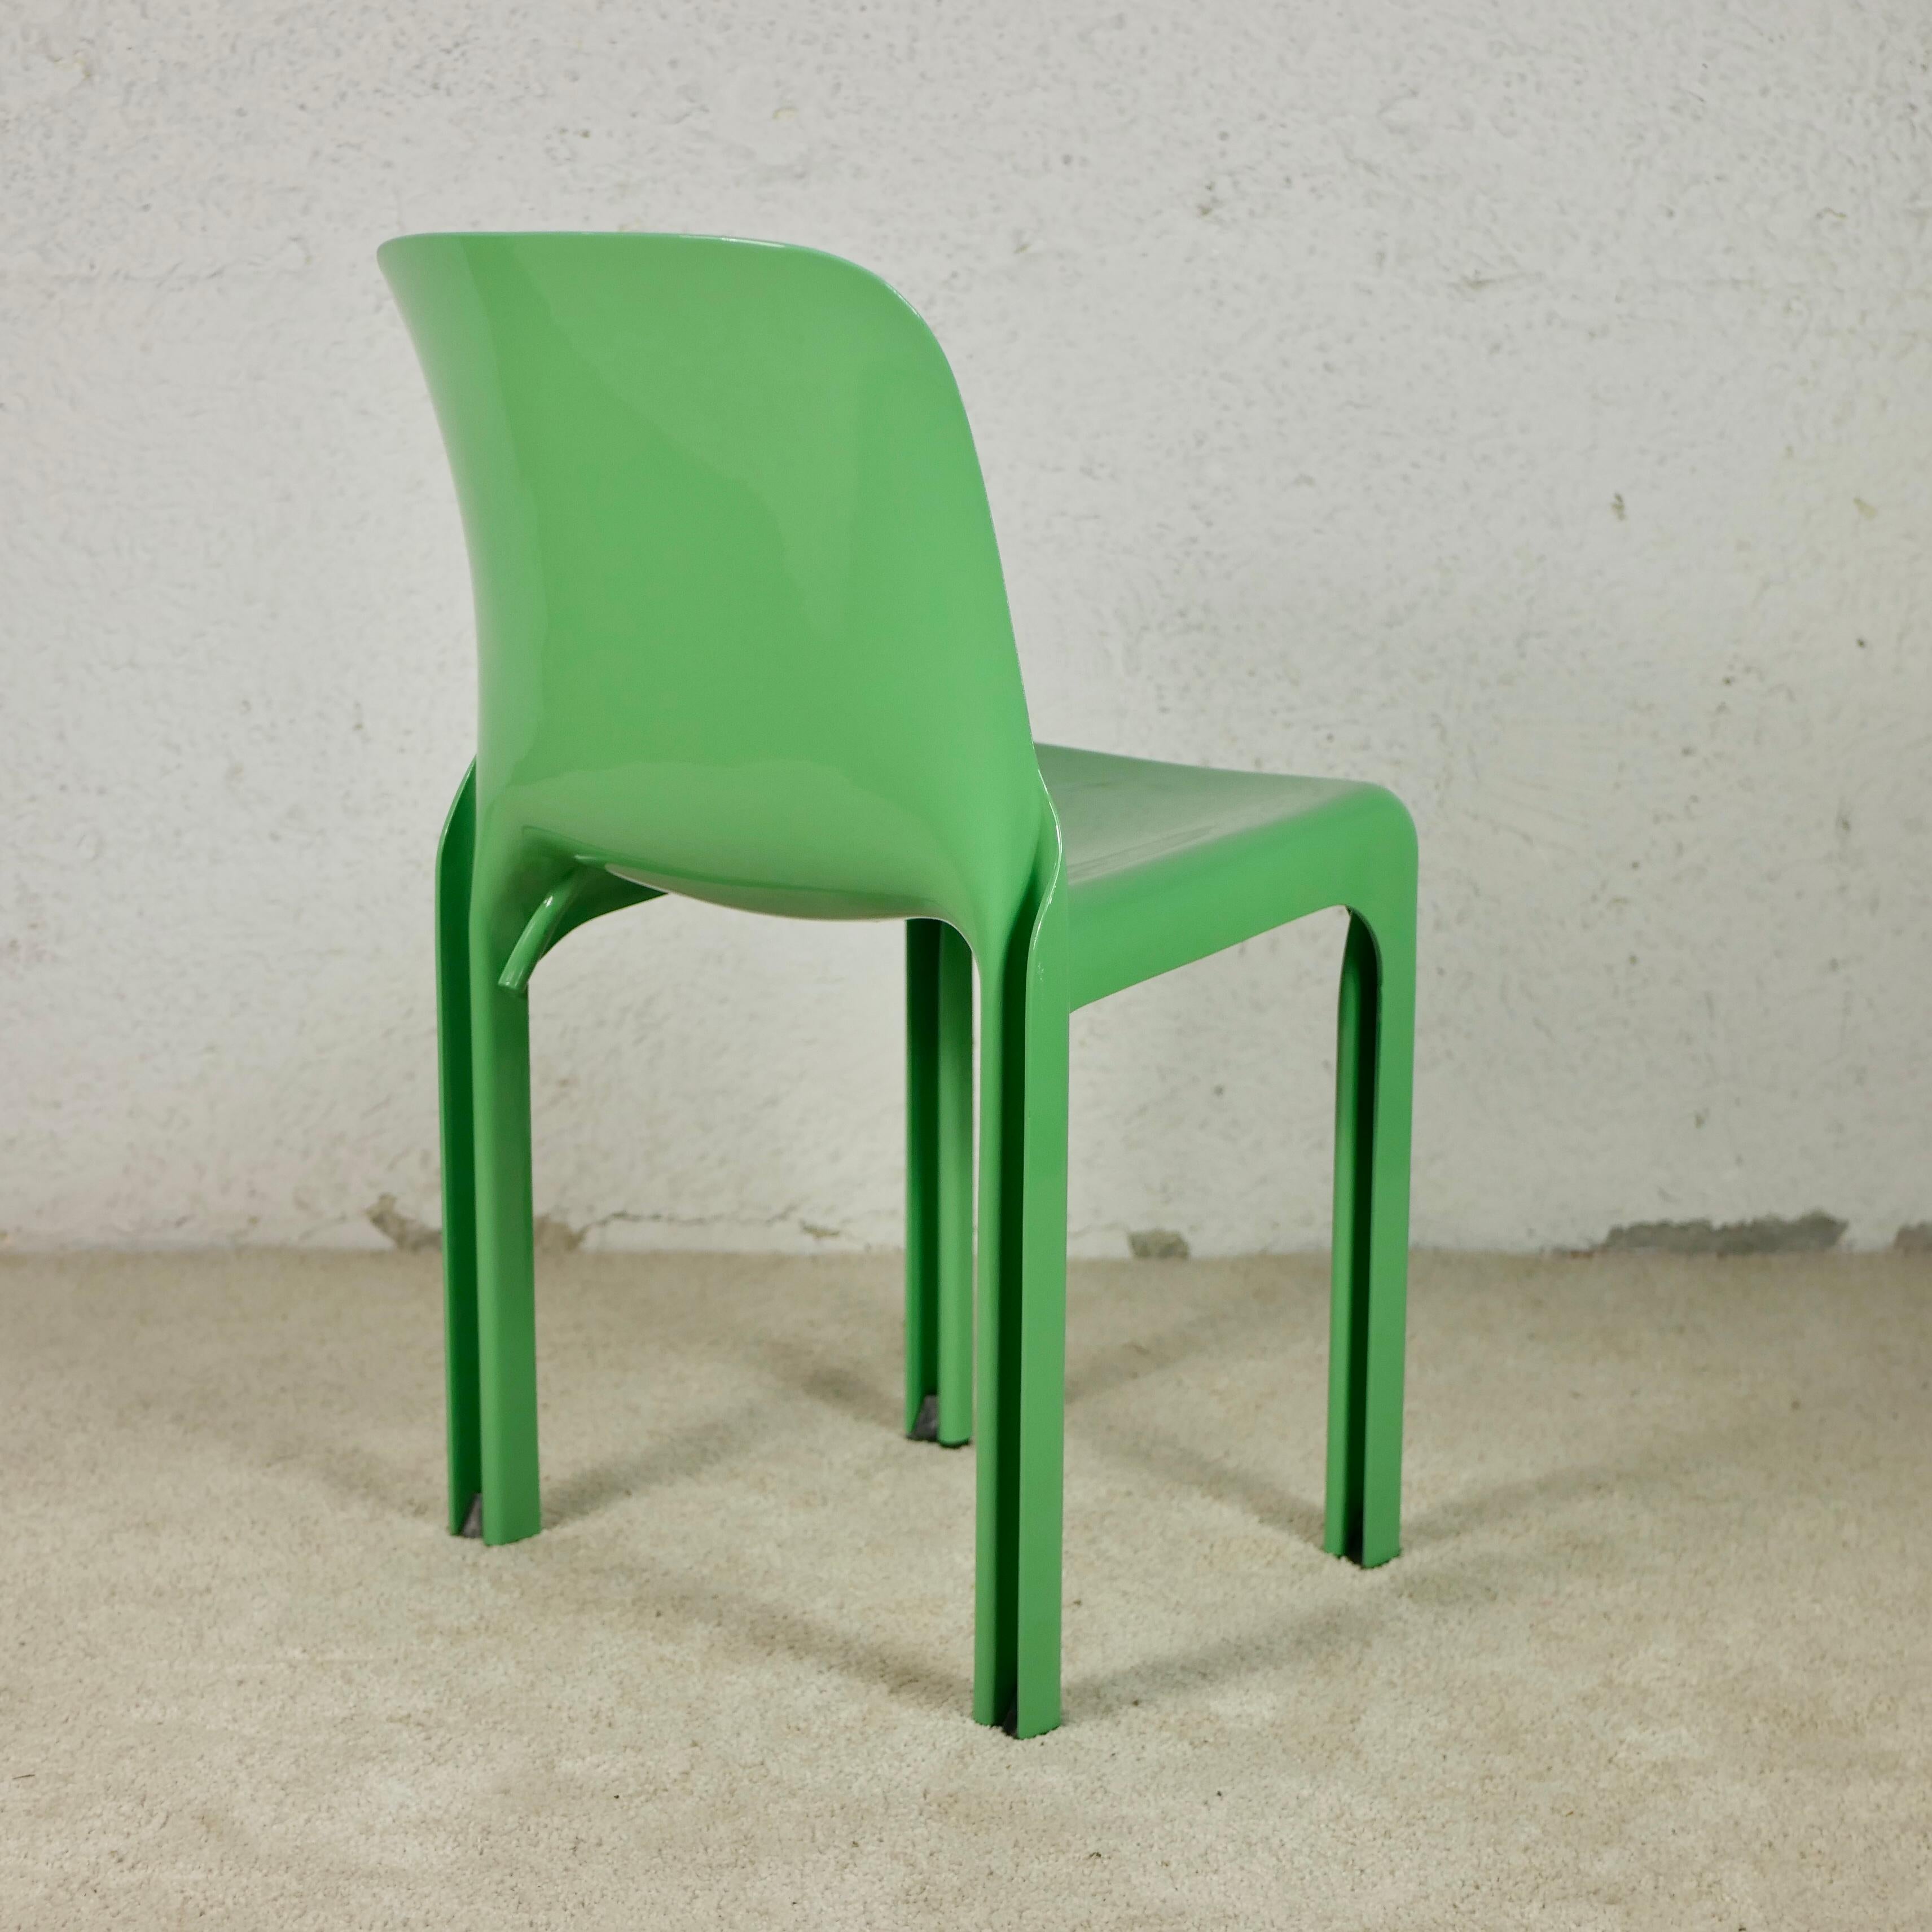 Late 20th Century Pistacchio Green Selene Chairs by Vico Magistretti for Artemide